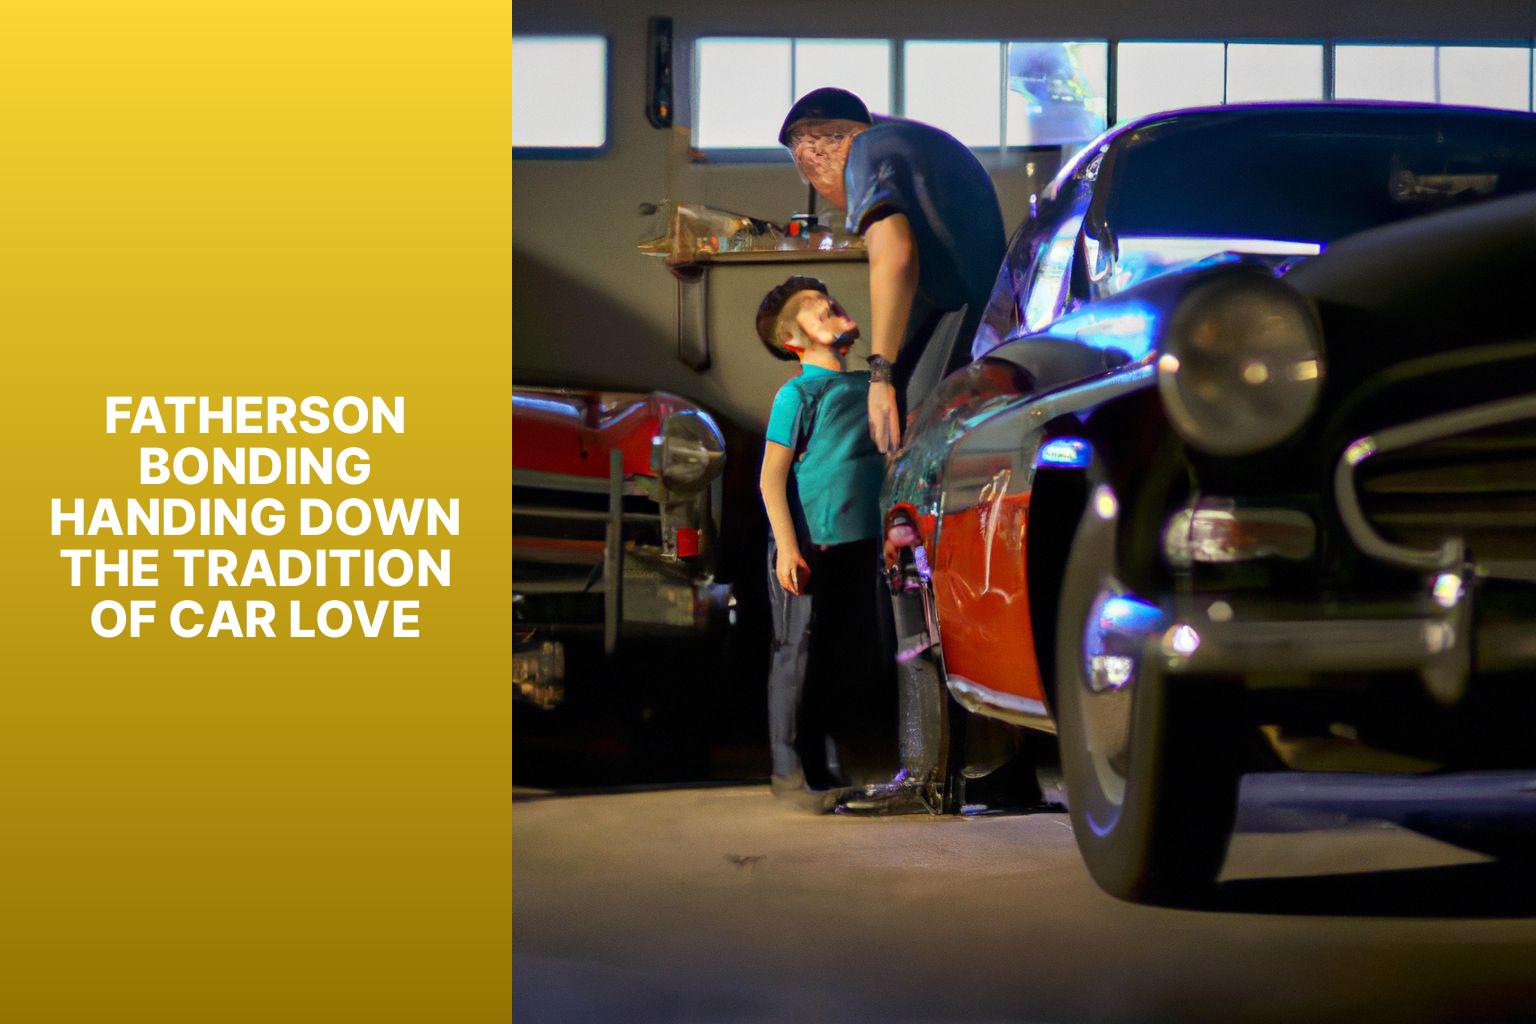 Father-Son Bonding: Handing Down the Tradition of Car Love